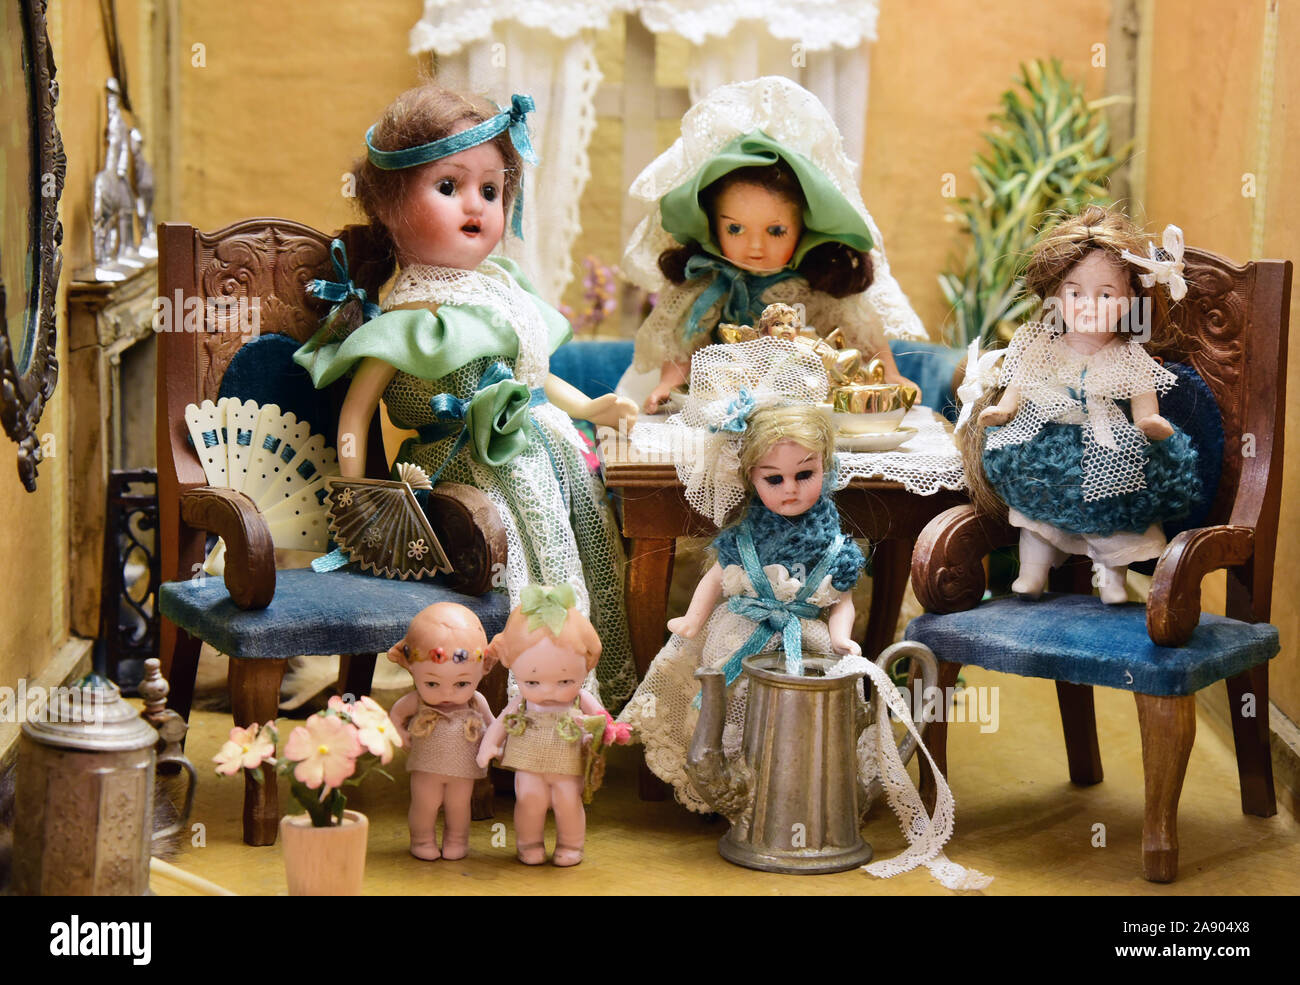 06 November 2020, Saxony, Delitzsch: In the Museum Barockschloss Delitzsch  the collector Hella Müller from Zwönitz is preparing a doll's house with  bisque head dolls from the time around 1898 for the